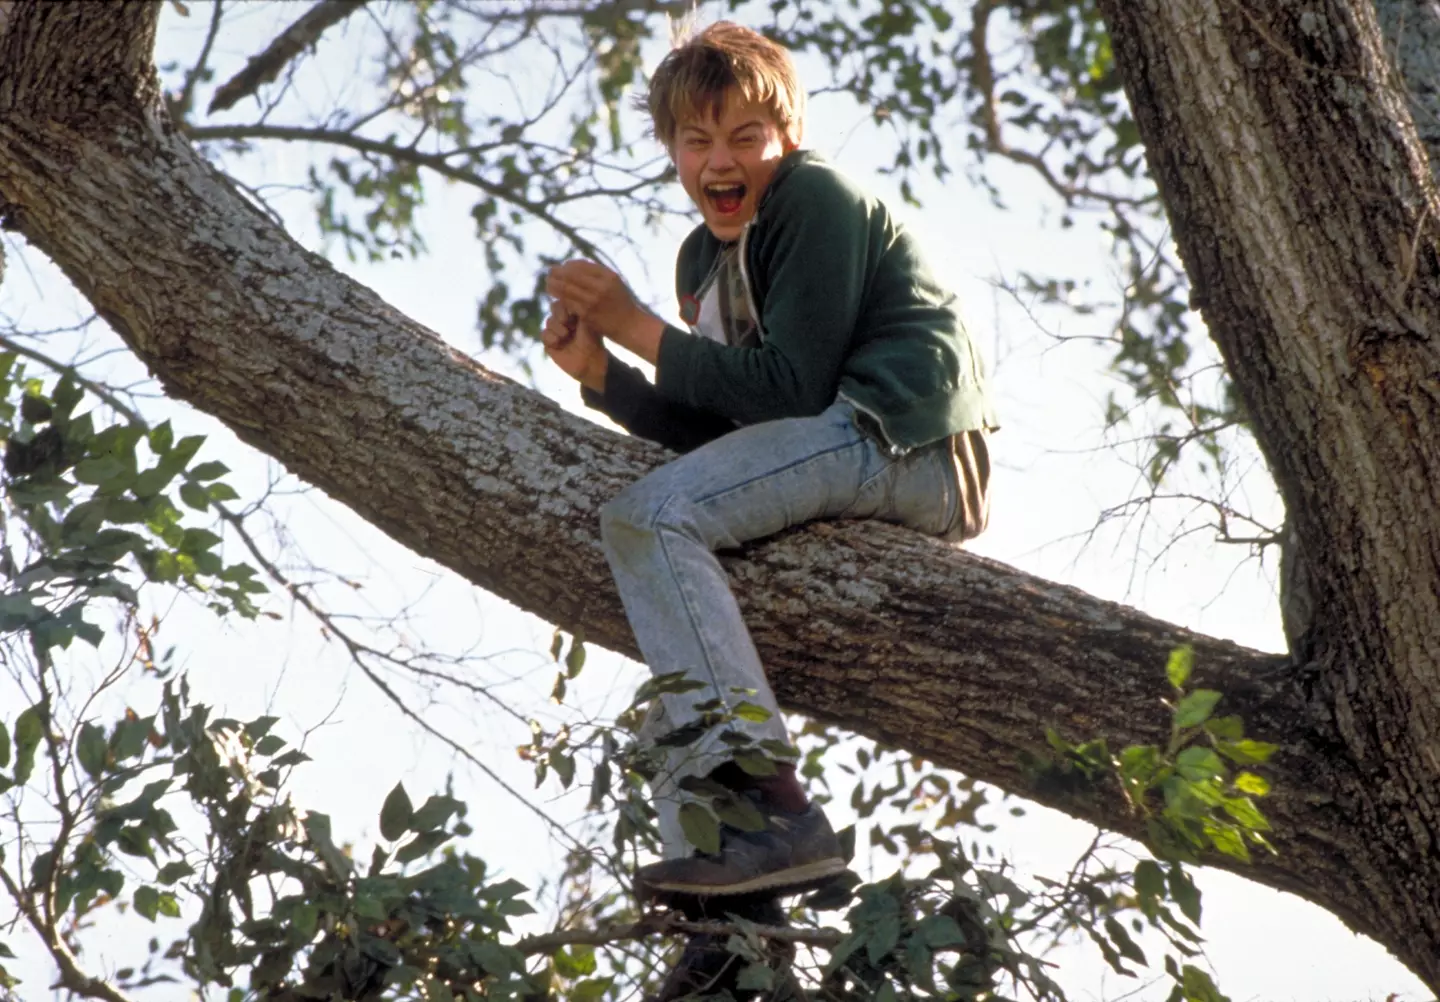 Fans love DiCaprio's performance in What's Eating Gilbert Grape.